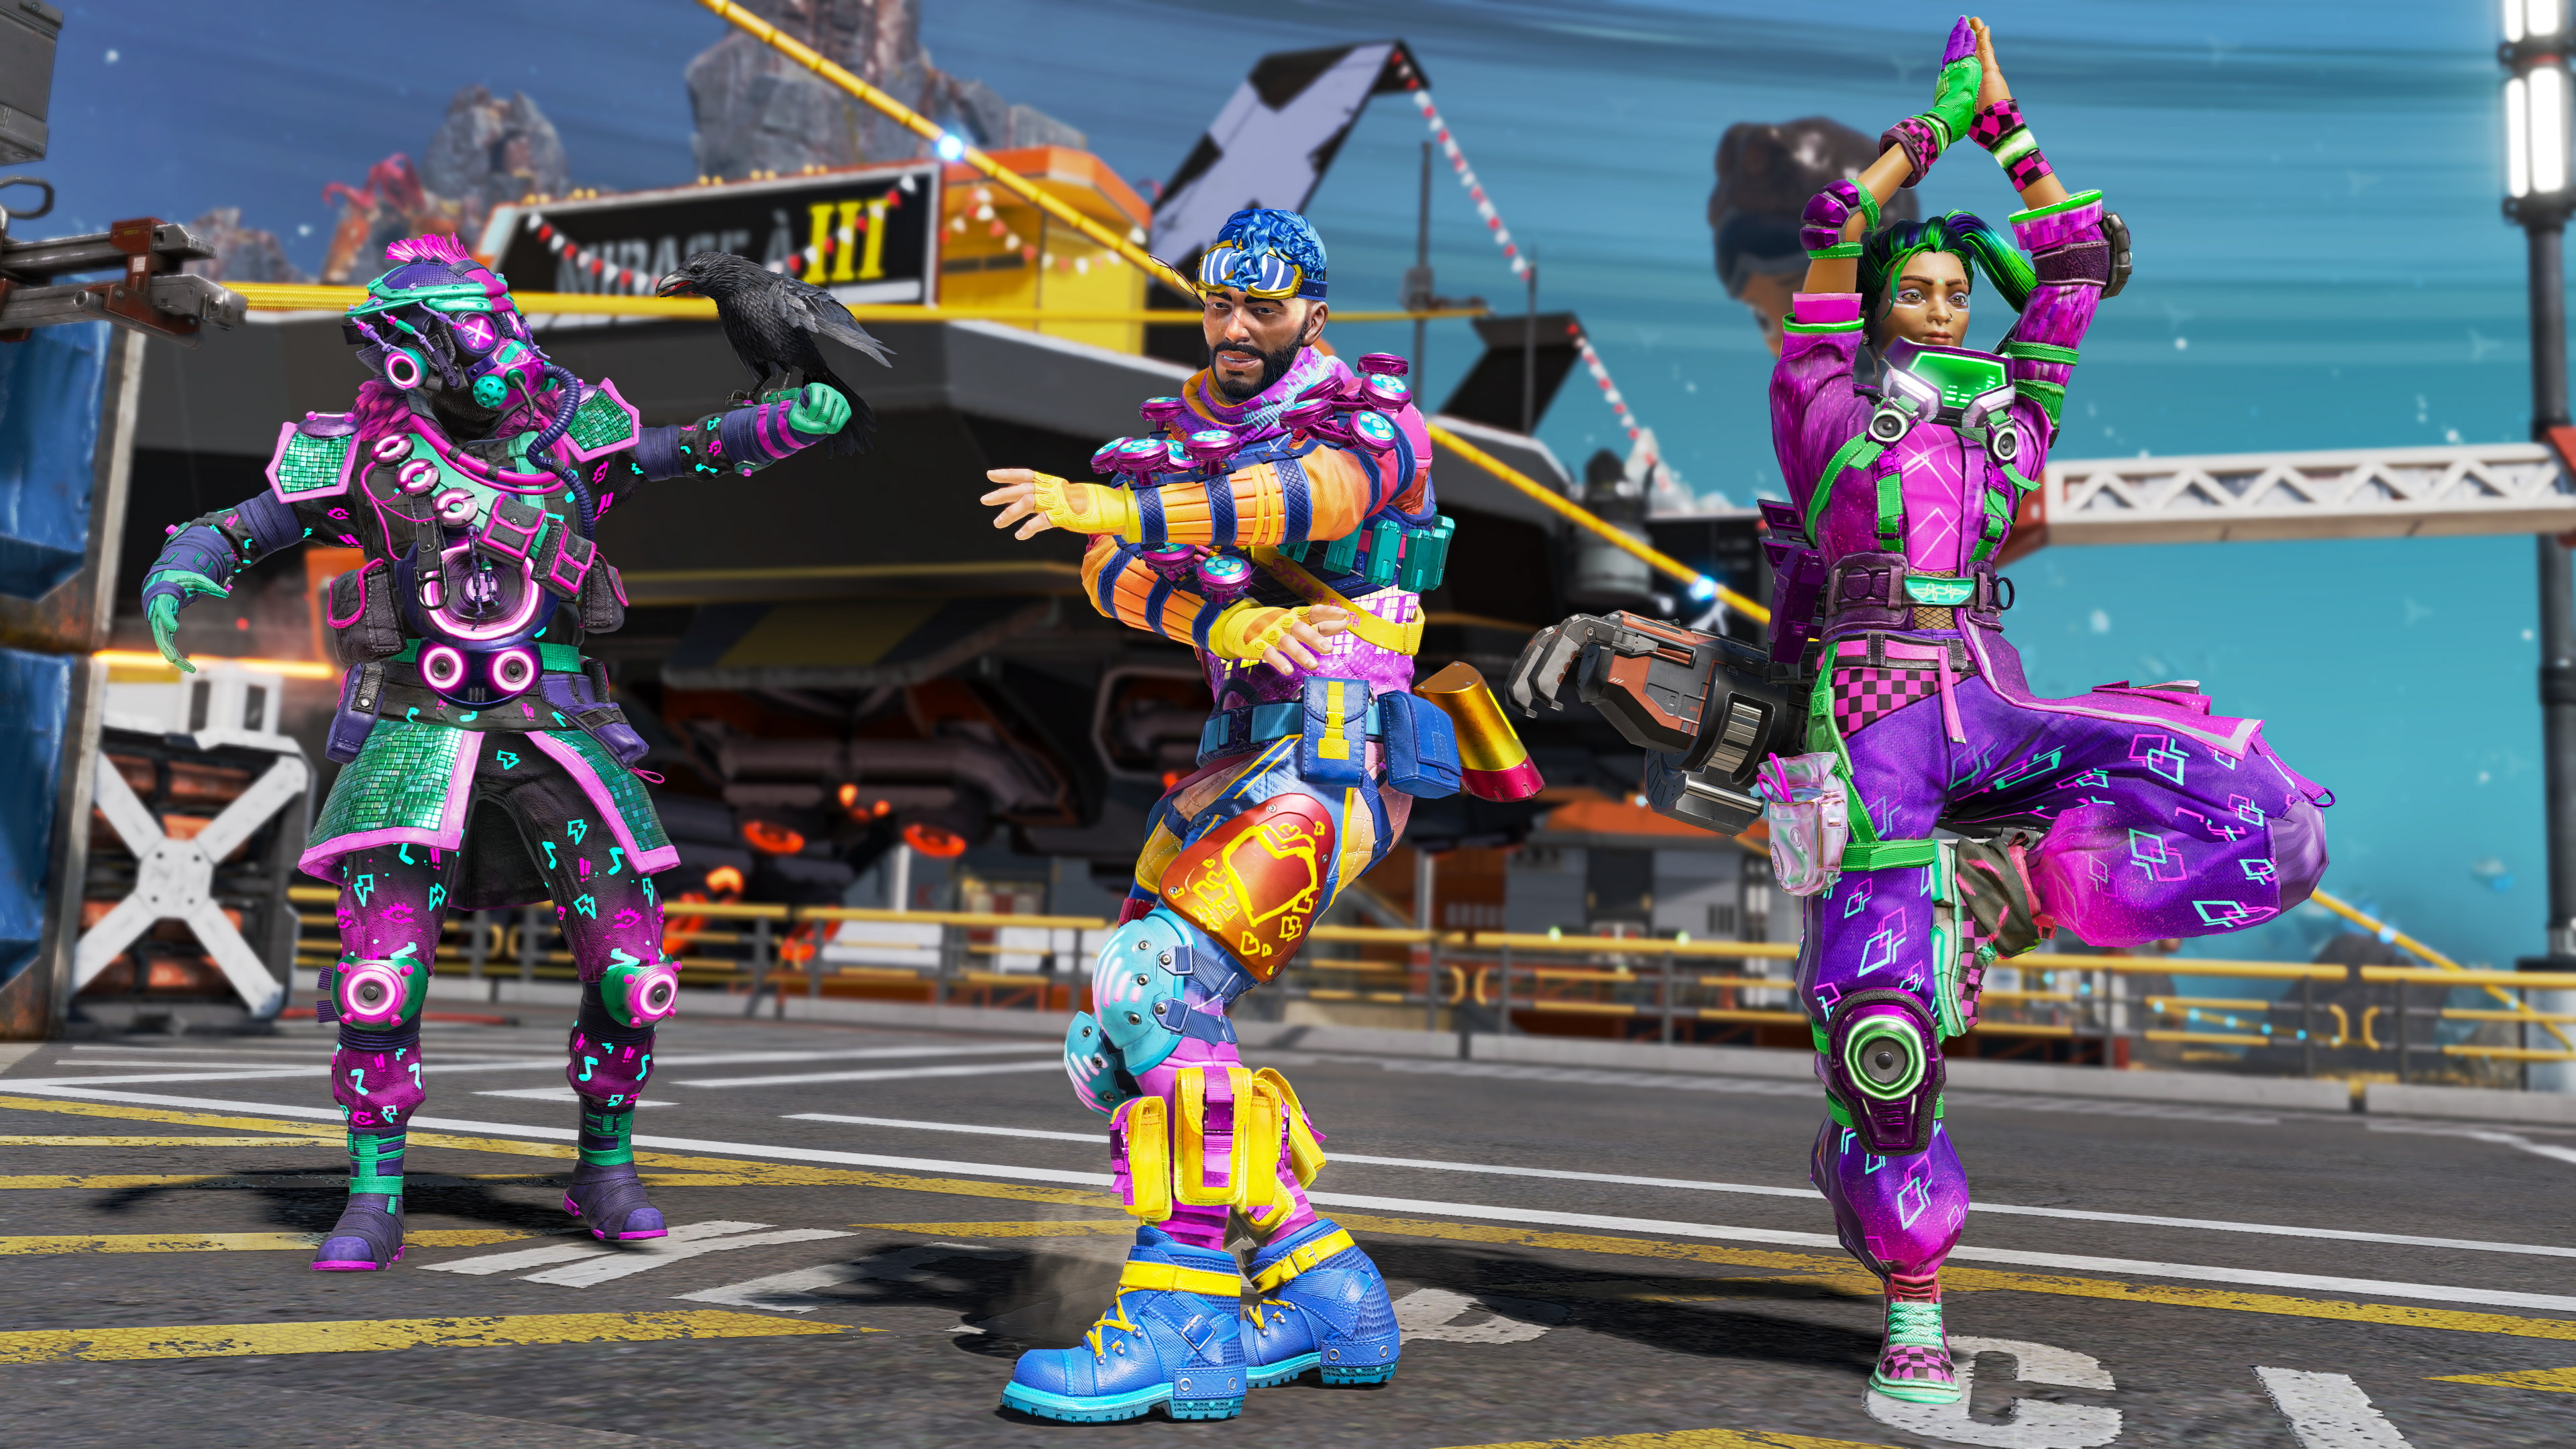 Three Apex Legends in emote poses, wearing new skins available in the season 16 battle pass